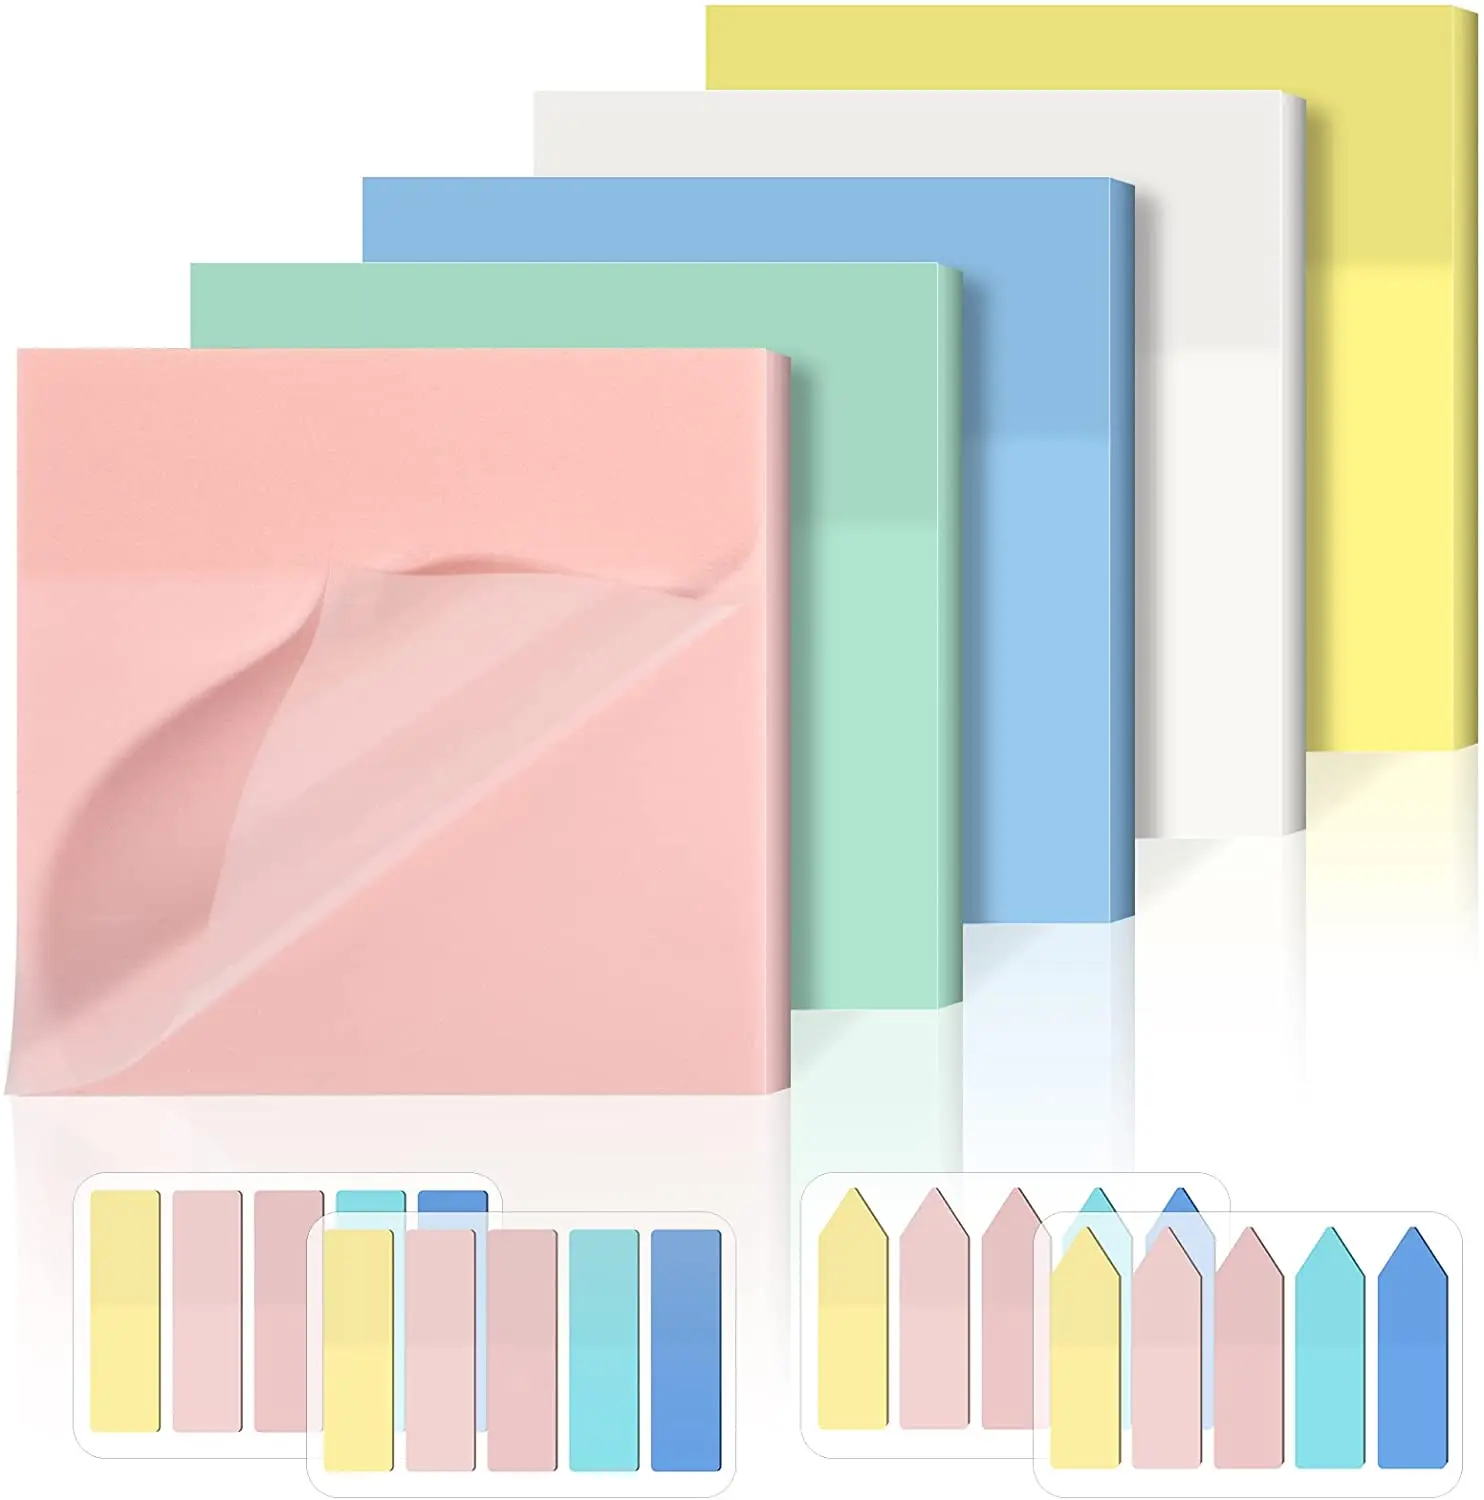 50 Sheets Transparent Posted it Sticky Note Tabs Page Pads Posits To Do List Papeleria Journal School Stationery Office Supplies